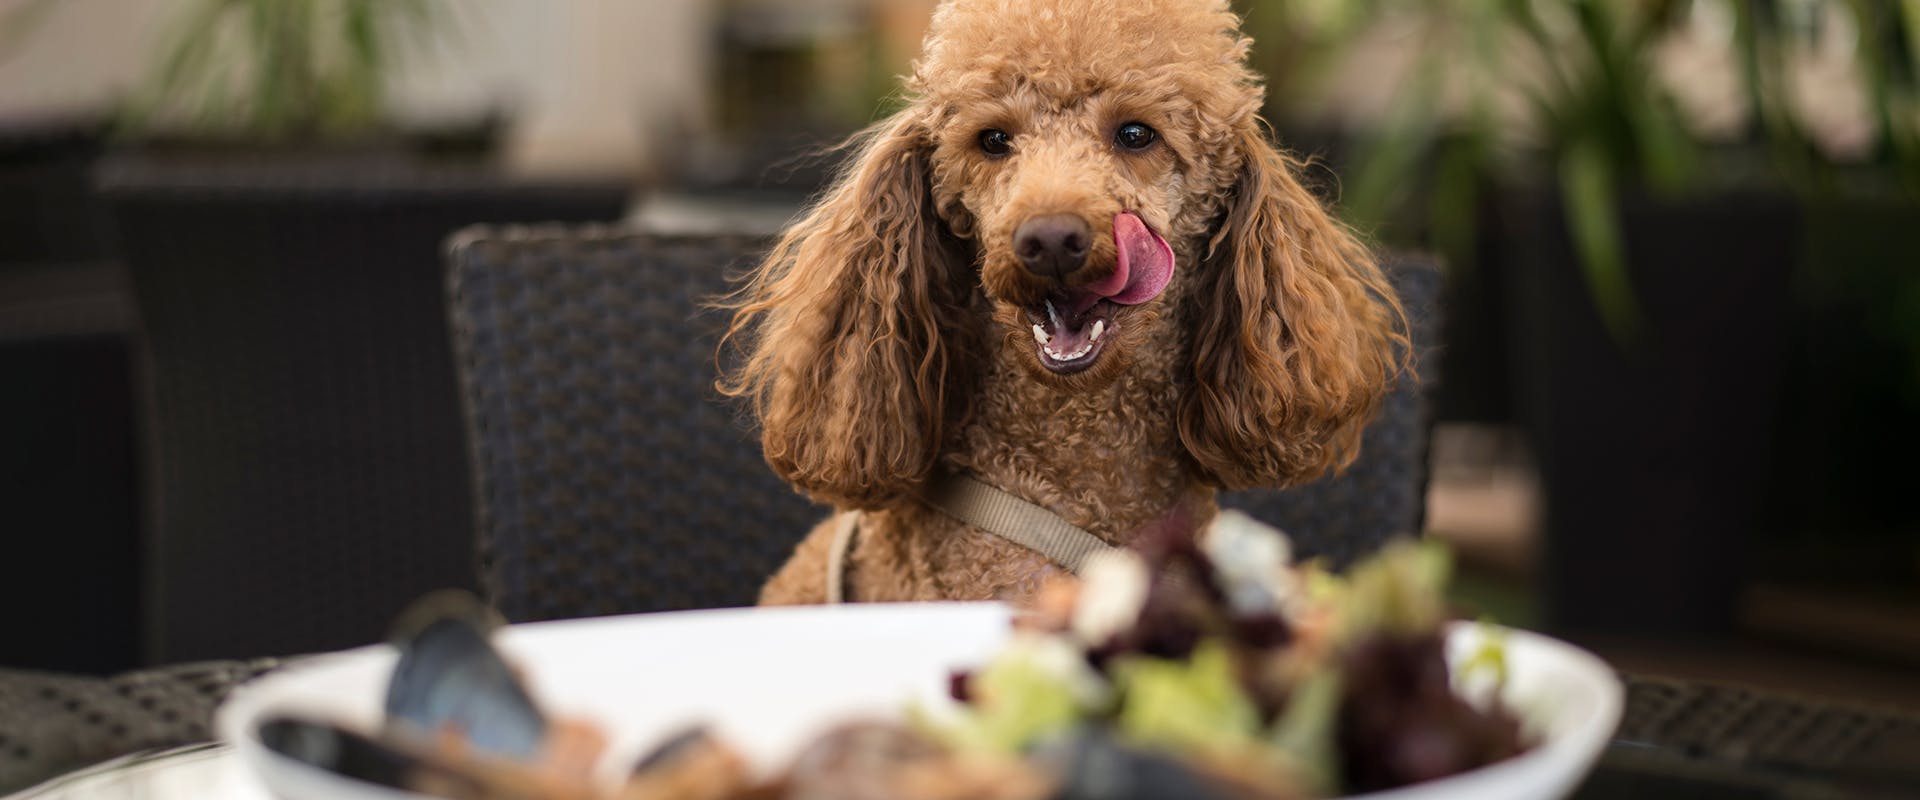 A dog sitting in a restaurant, a plate of food in front of it